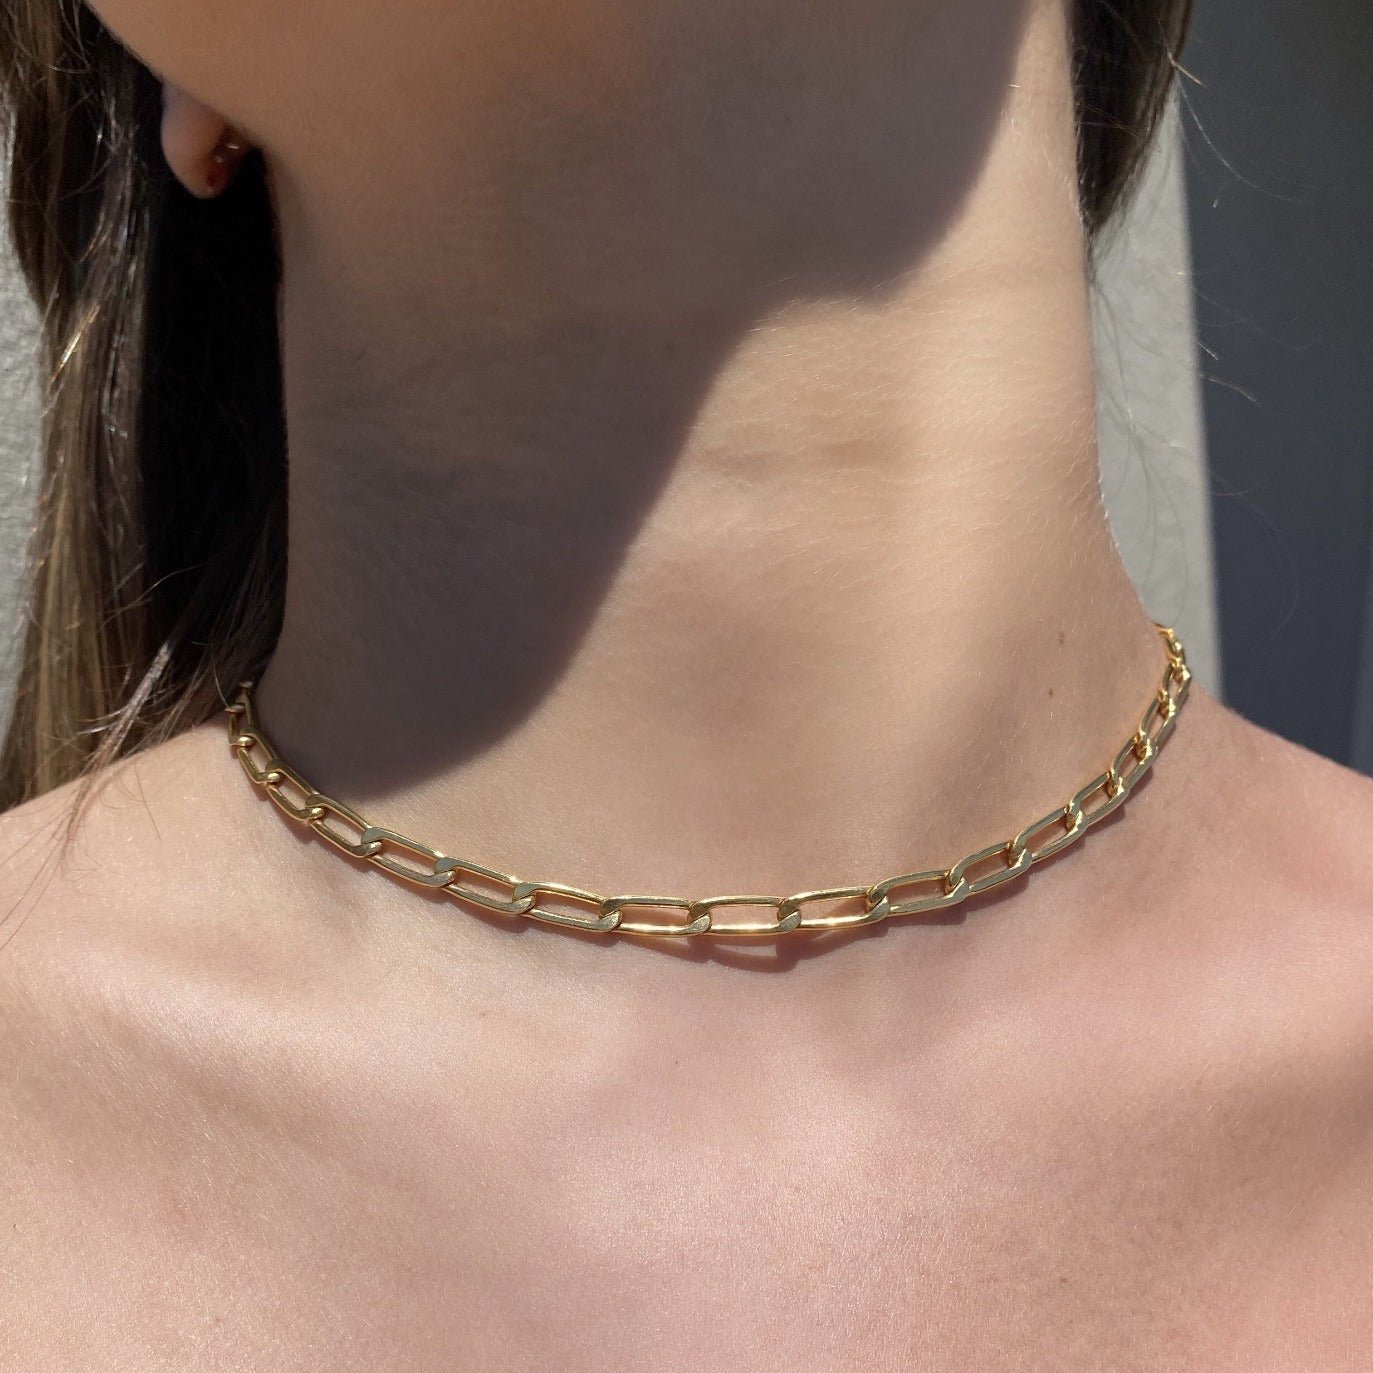 Gold Filled - Large Elongated Curb Chain Necklace - Camille Jewelry